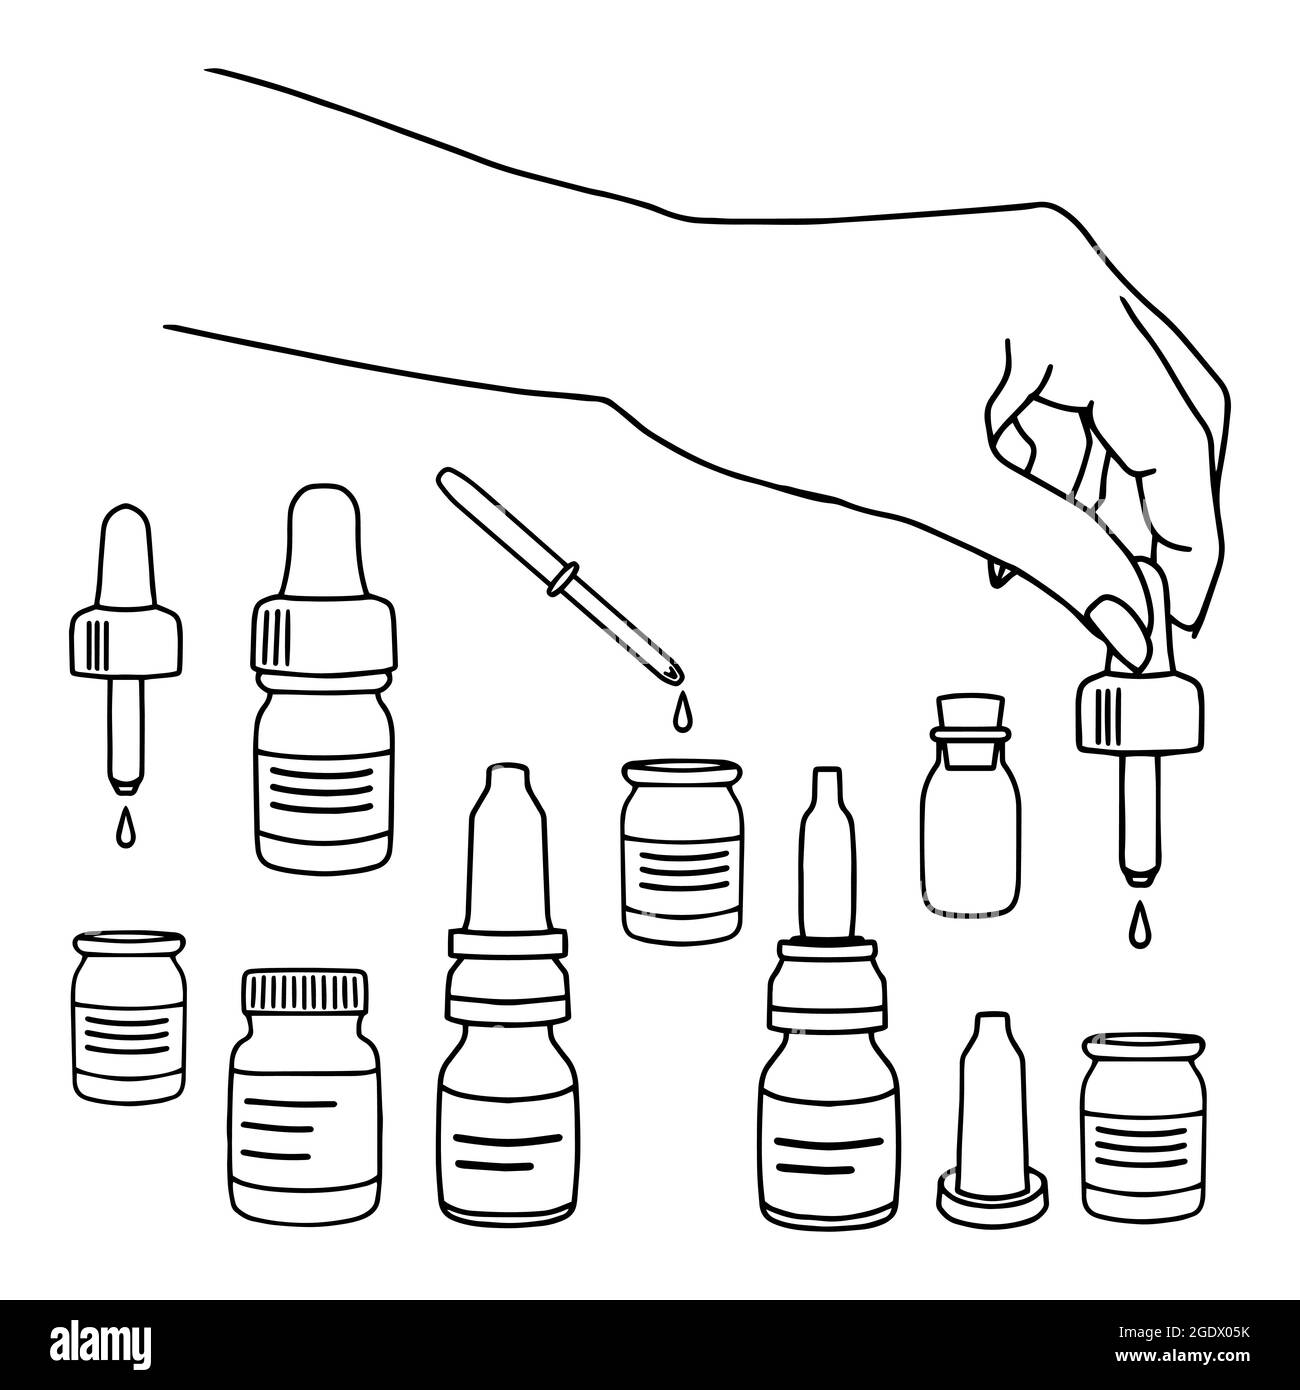 A set of pharmacy medicine bottles with a dropper in the style of doodles in vector format, suitable for use on the Internet, printing or advertising. Stock Vector